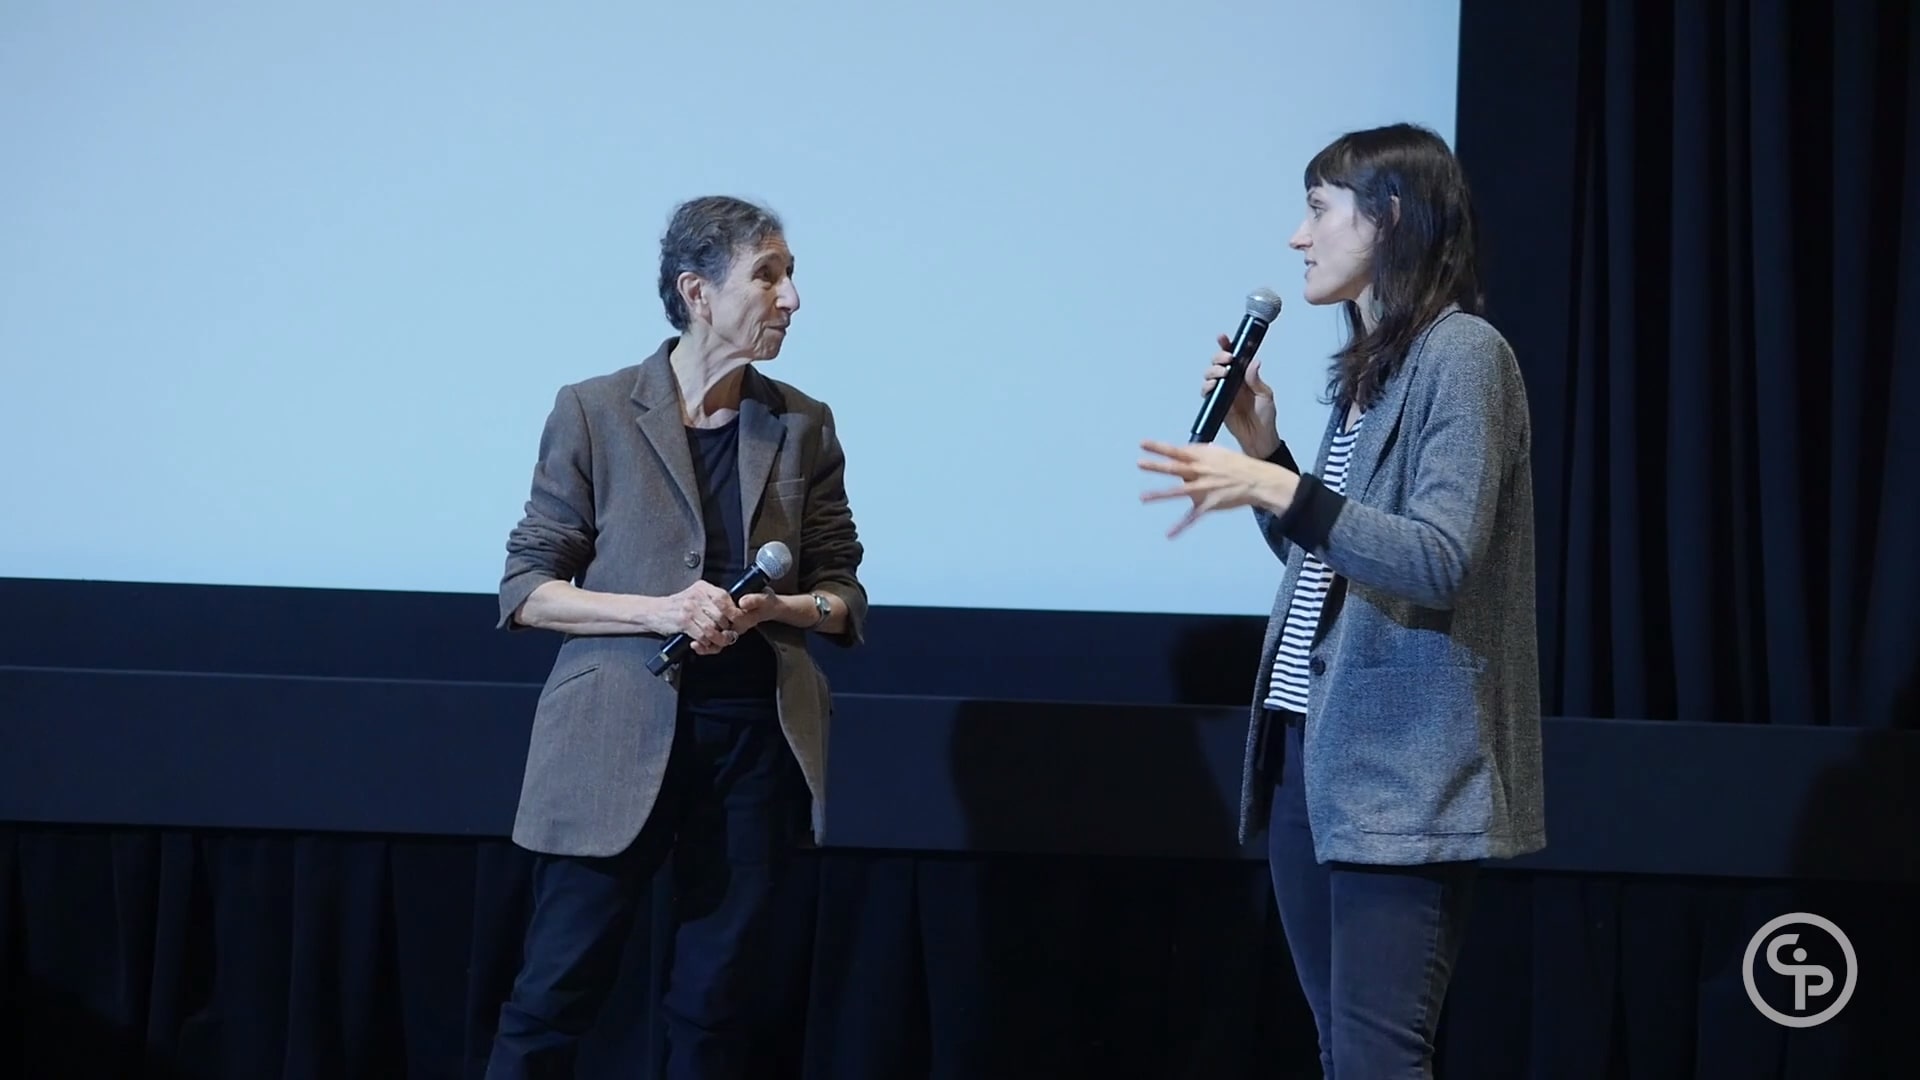 Still from Q&A with Silvia Federici and Astra Taylor - WHAT IS DEMOCRACY?